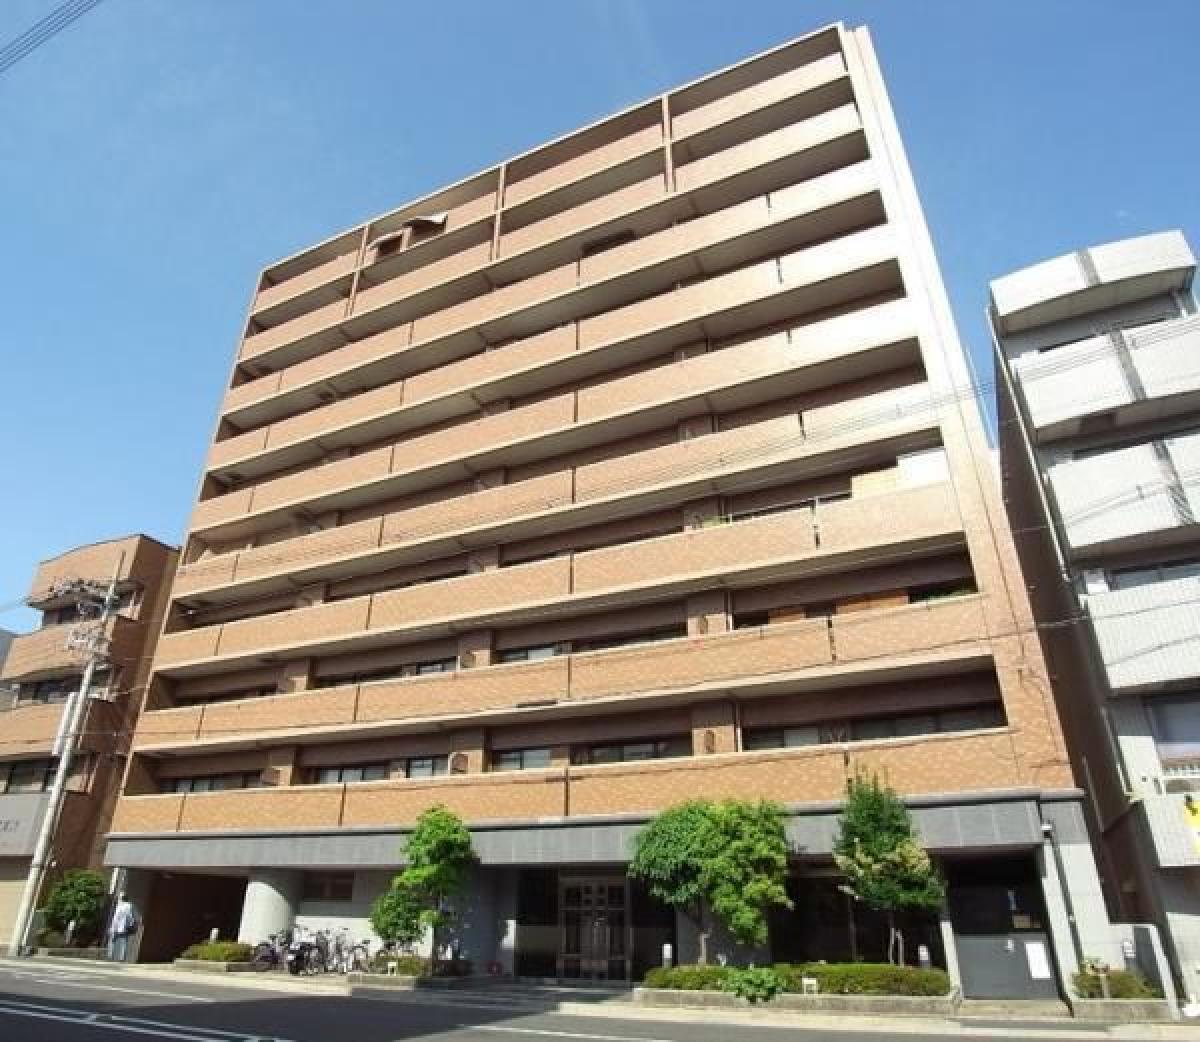 Picture of Apartment For Sale in Kyoto Shi Shimogyo Ku, Kyoto, Japan